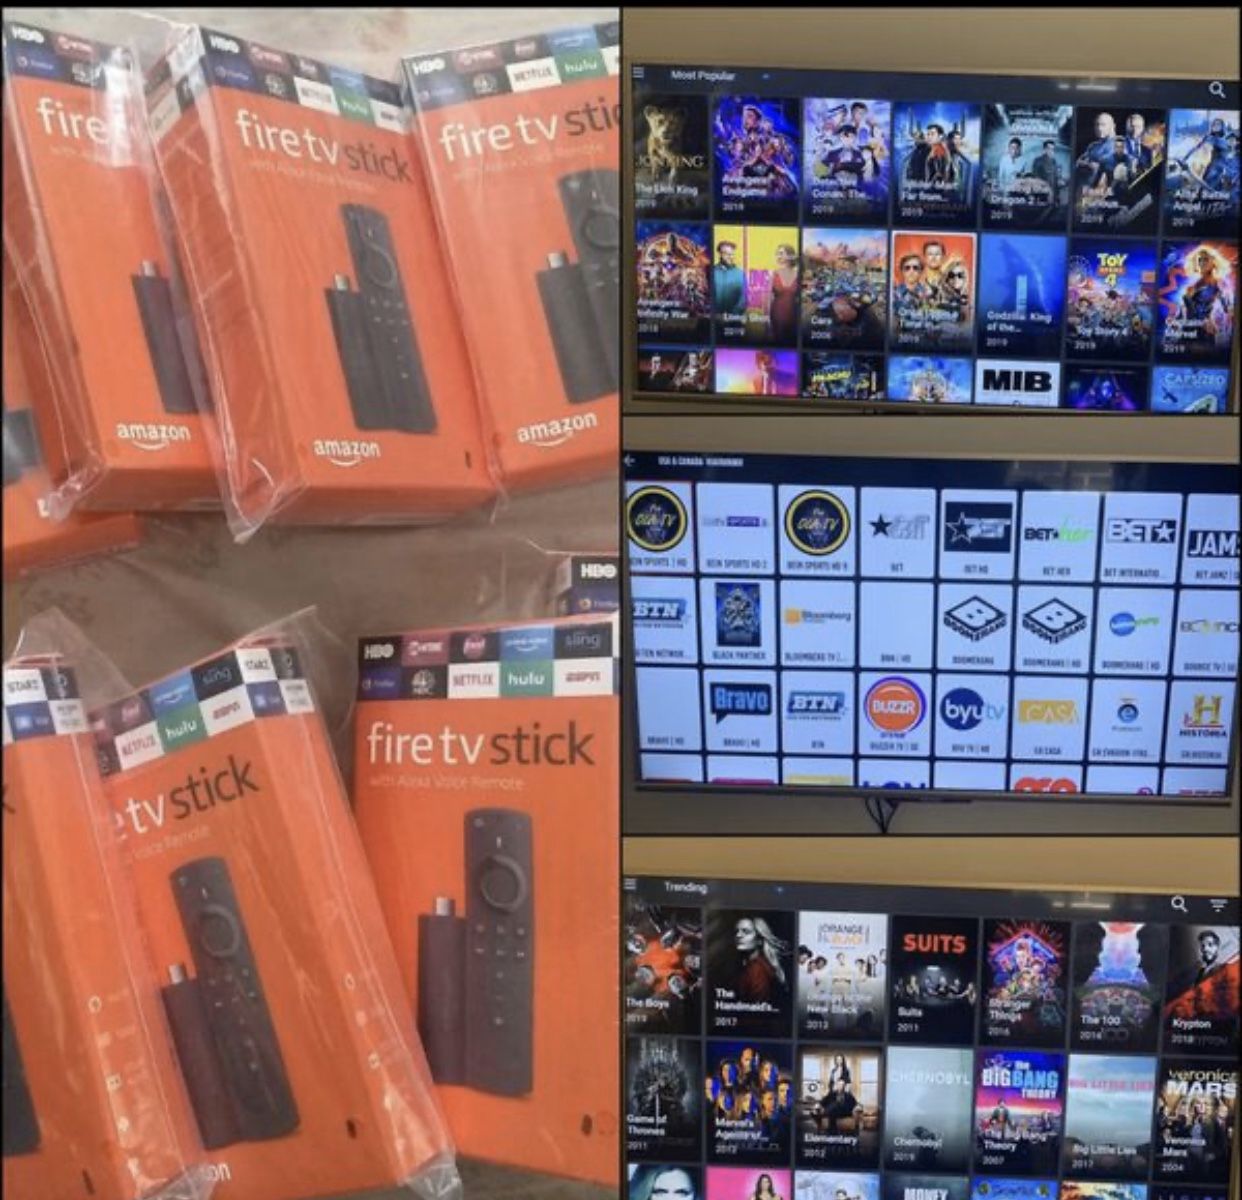 Unlocked and Programmed Fire TV sticks with Unlimited Movies, TV Shows(Series) and Live TV for sale. No Cable Needed just (WIFI).